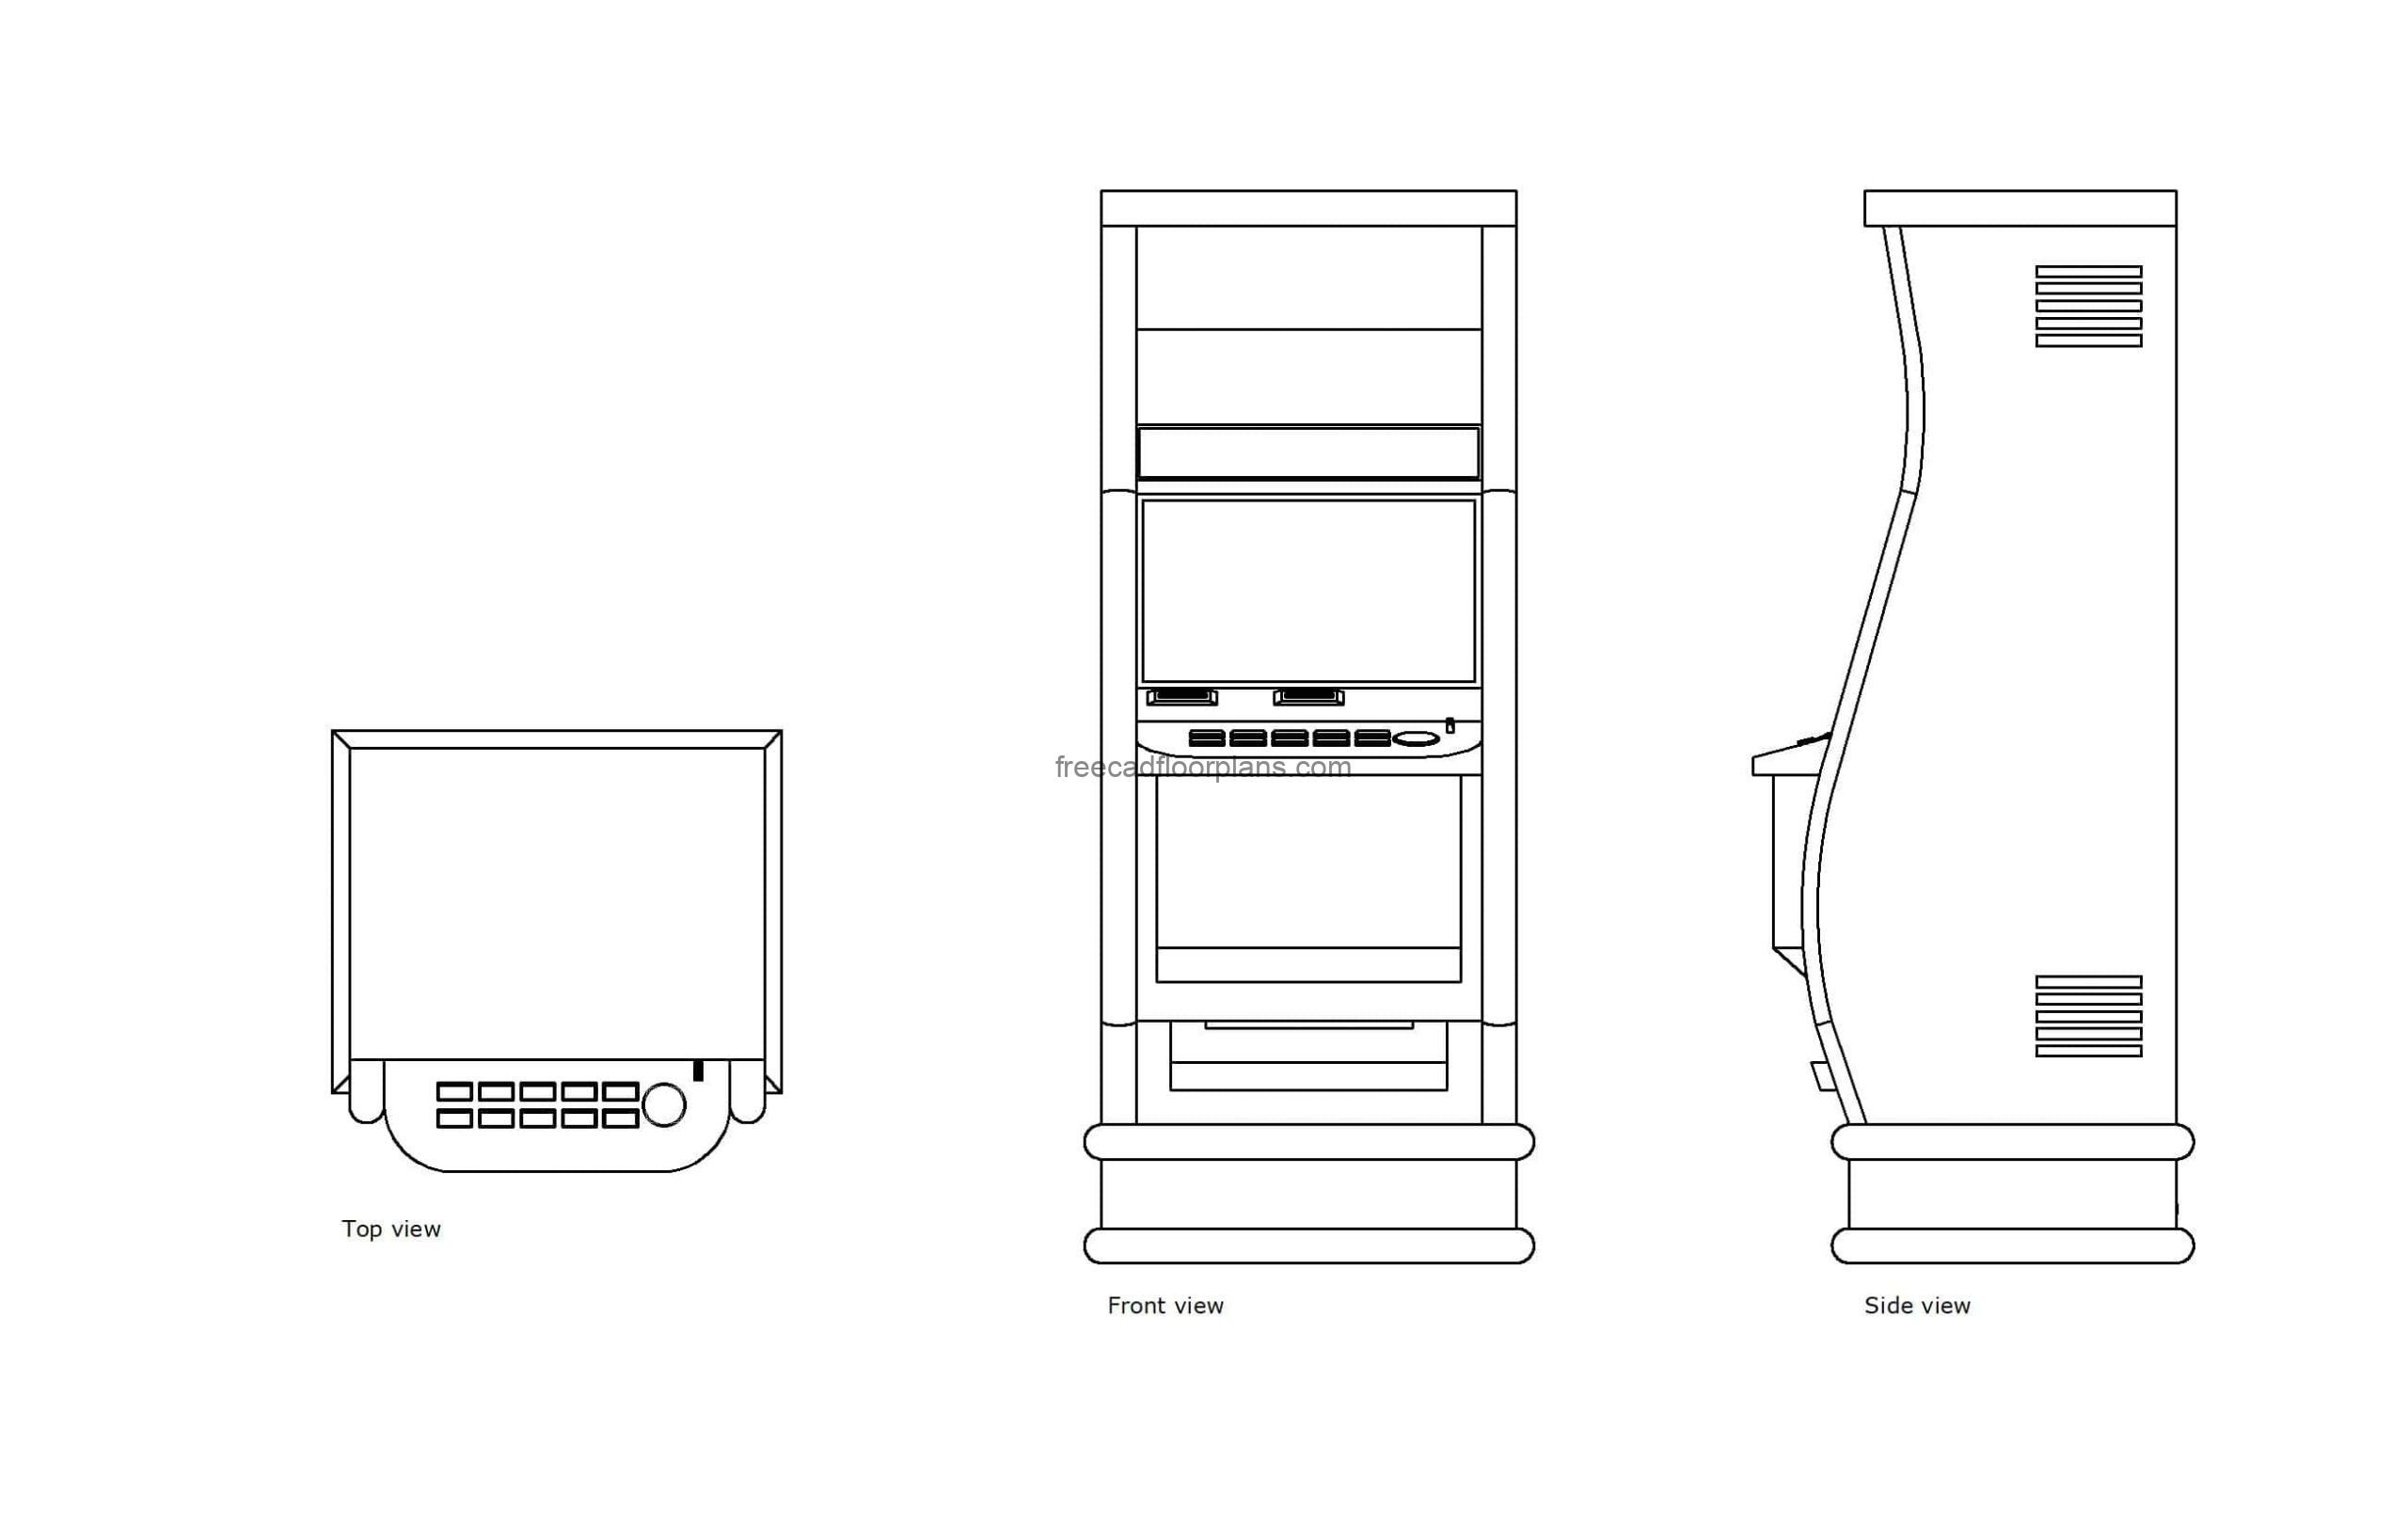 autocad drawing of a slot machine, 2d plan and elevation 2d views, dwg file free for download